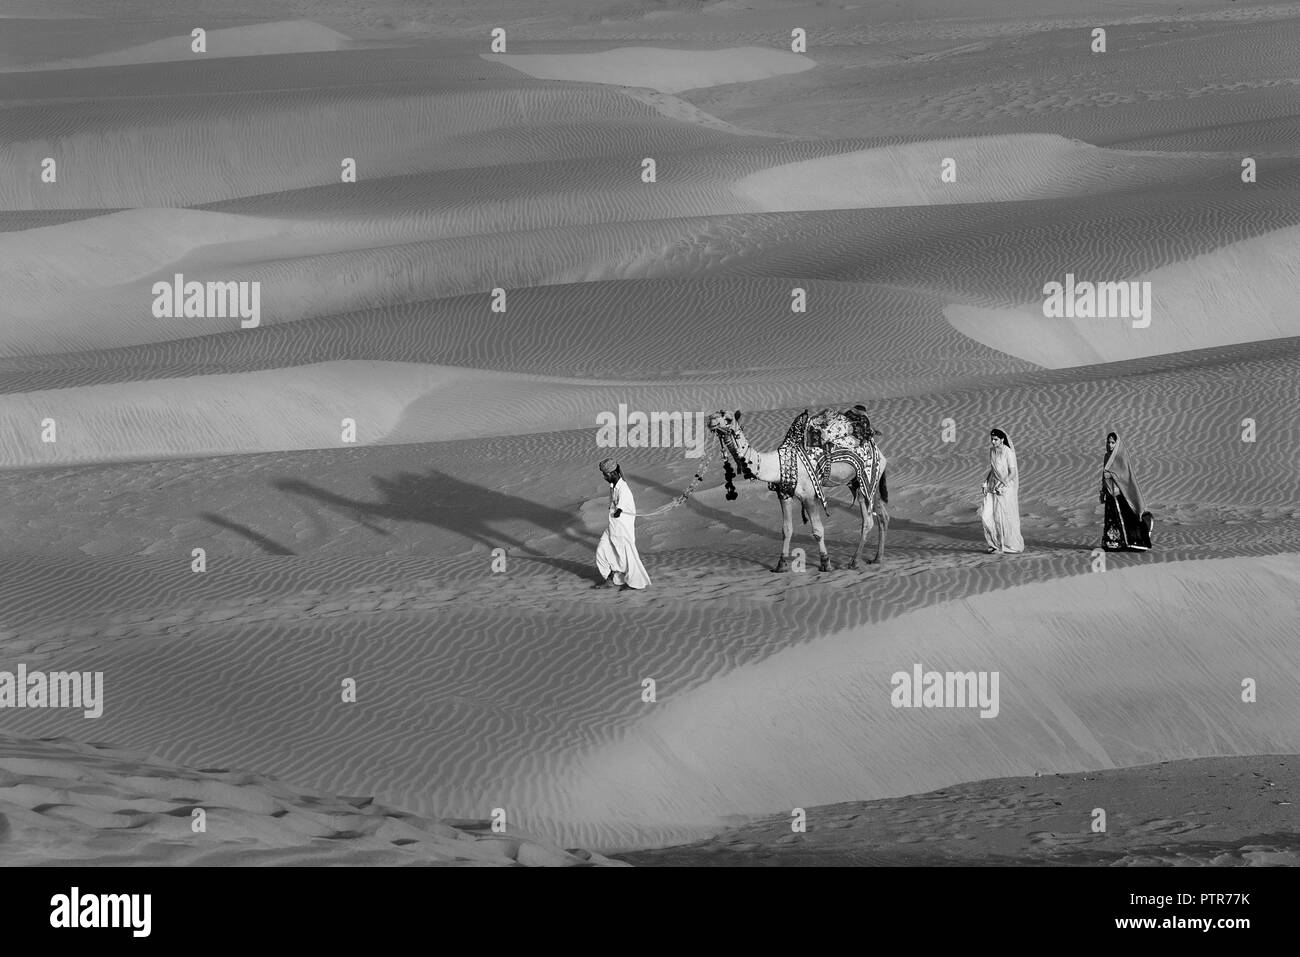 The image of Rajasthani traditional people in sand dunes of  Jaisalmer, Rajasthan, India Stock Photo